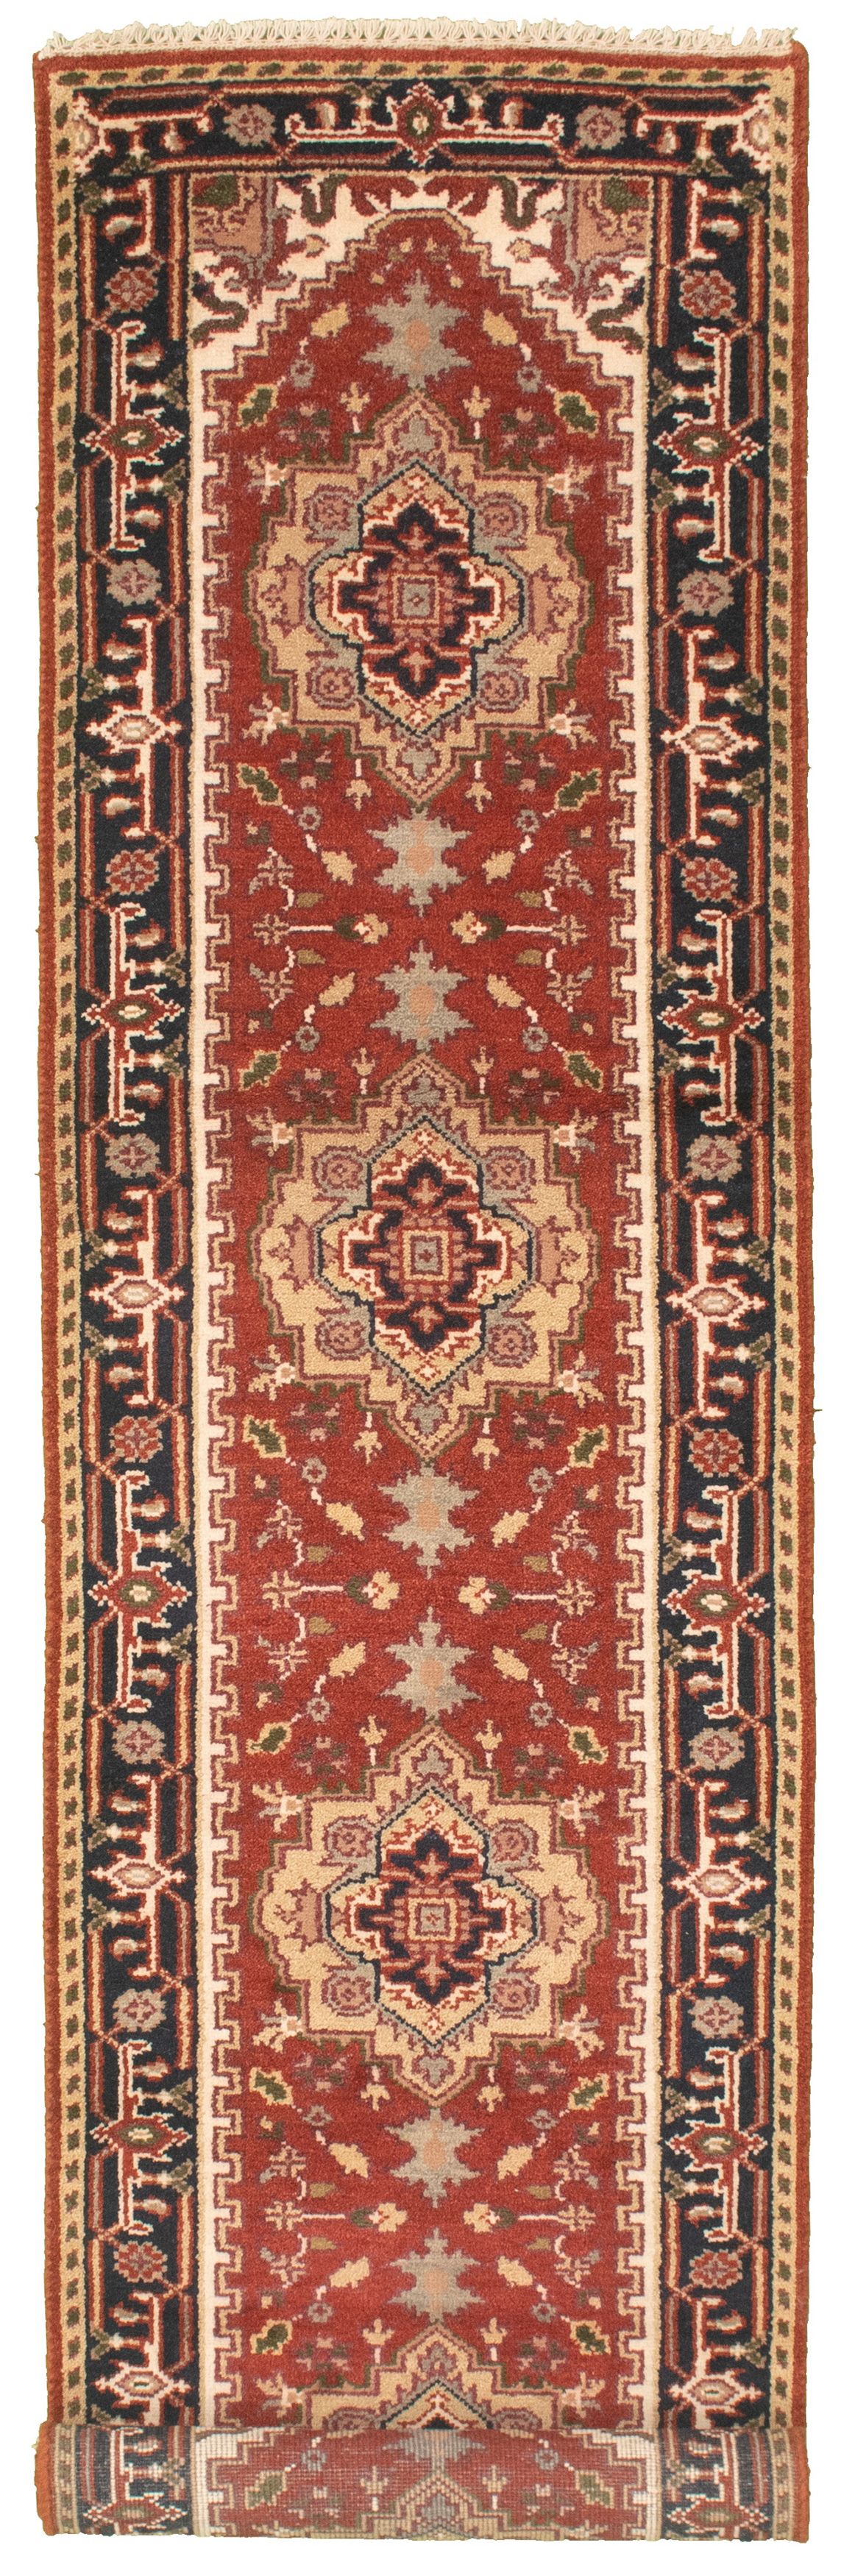 Hand-knotted Serapi Heritage I Red Wool Rug 2'7" x 10'2" Size: 2'7" x 10'2"  